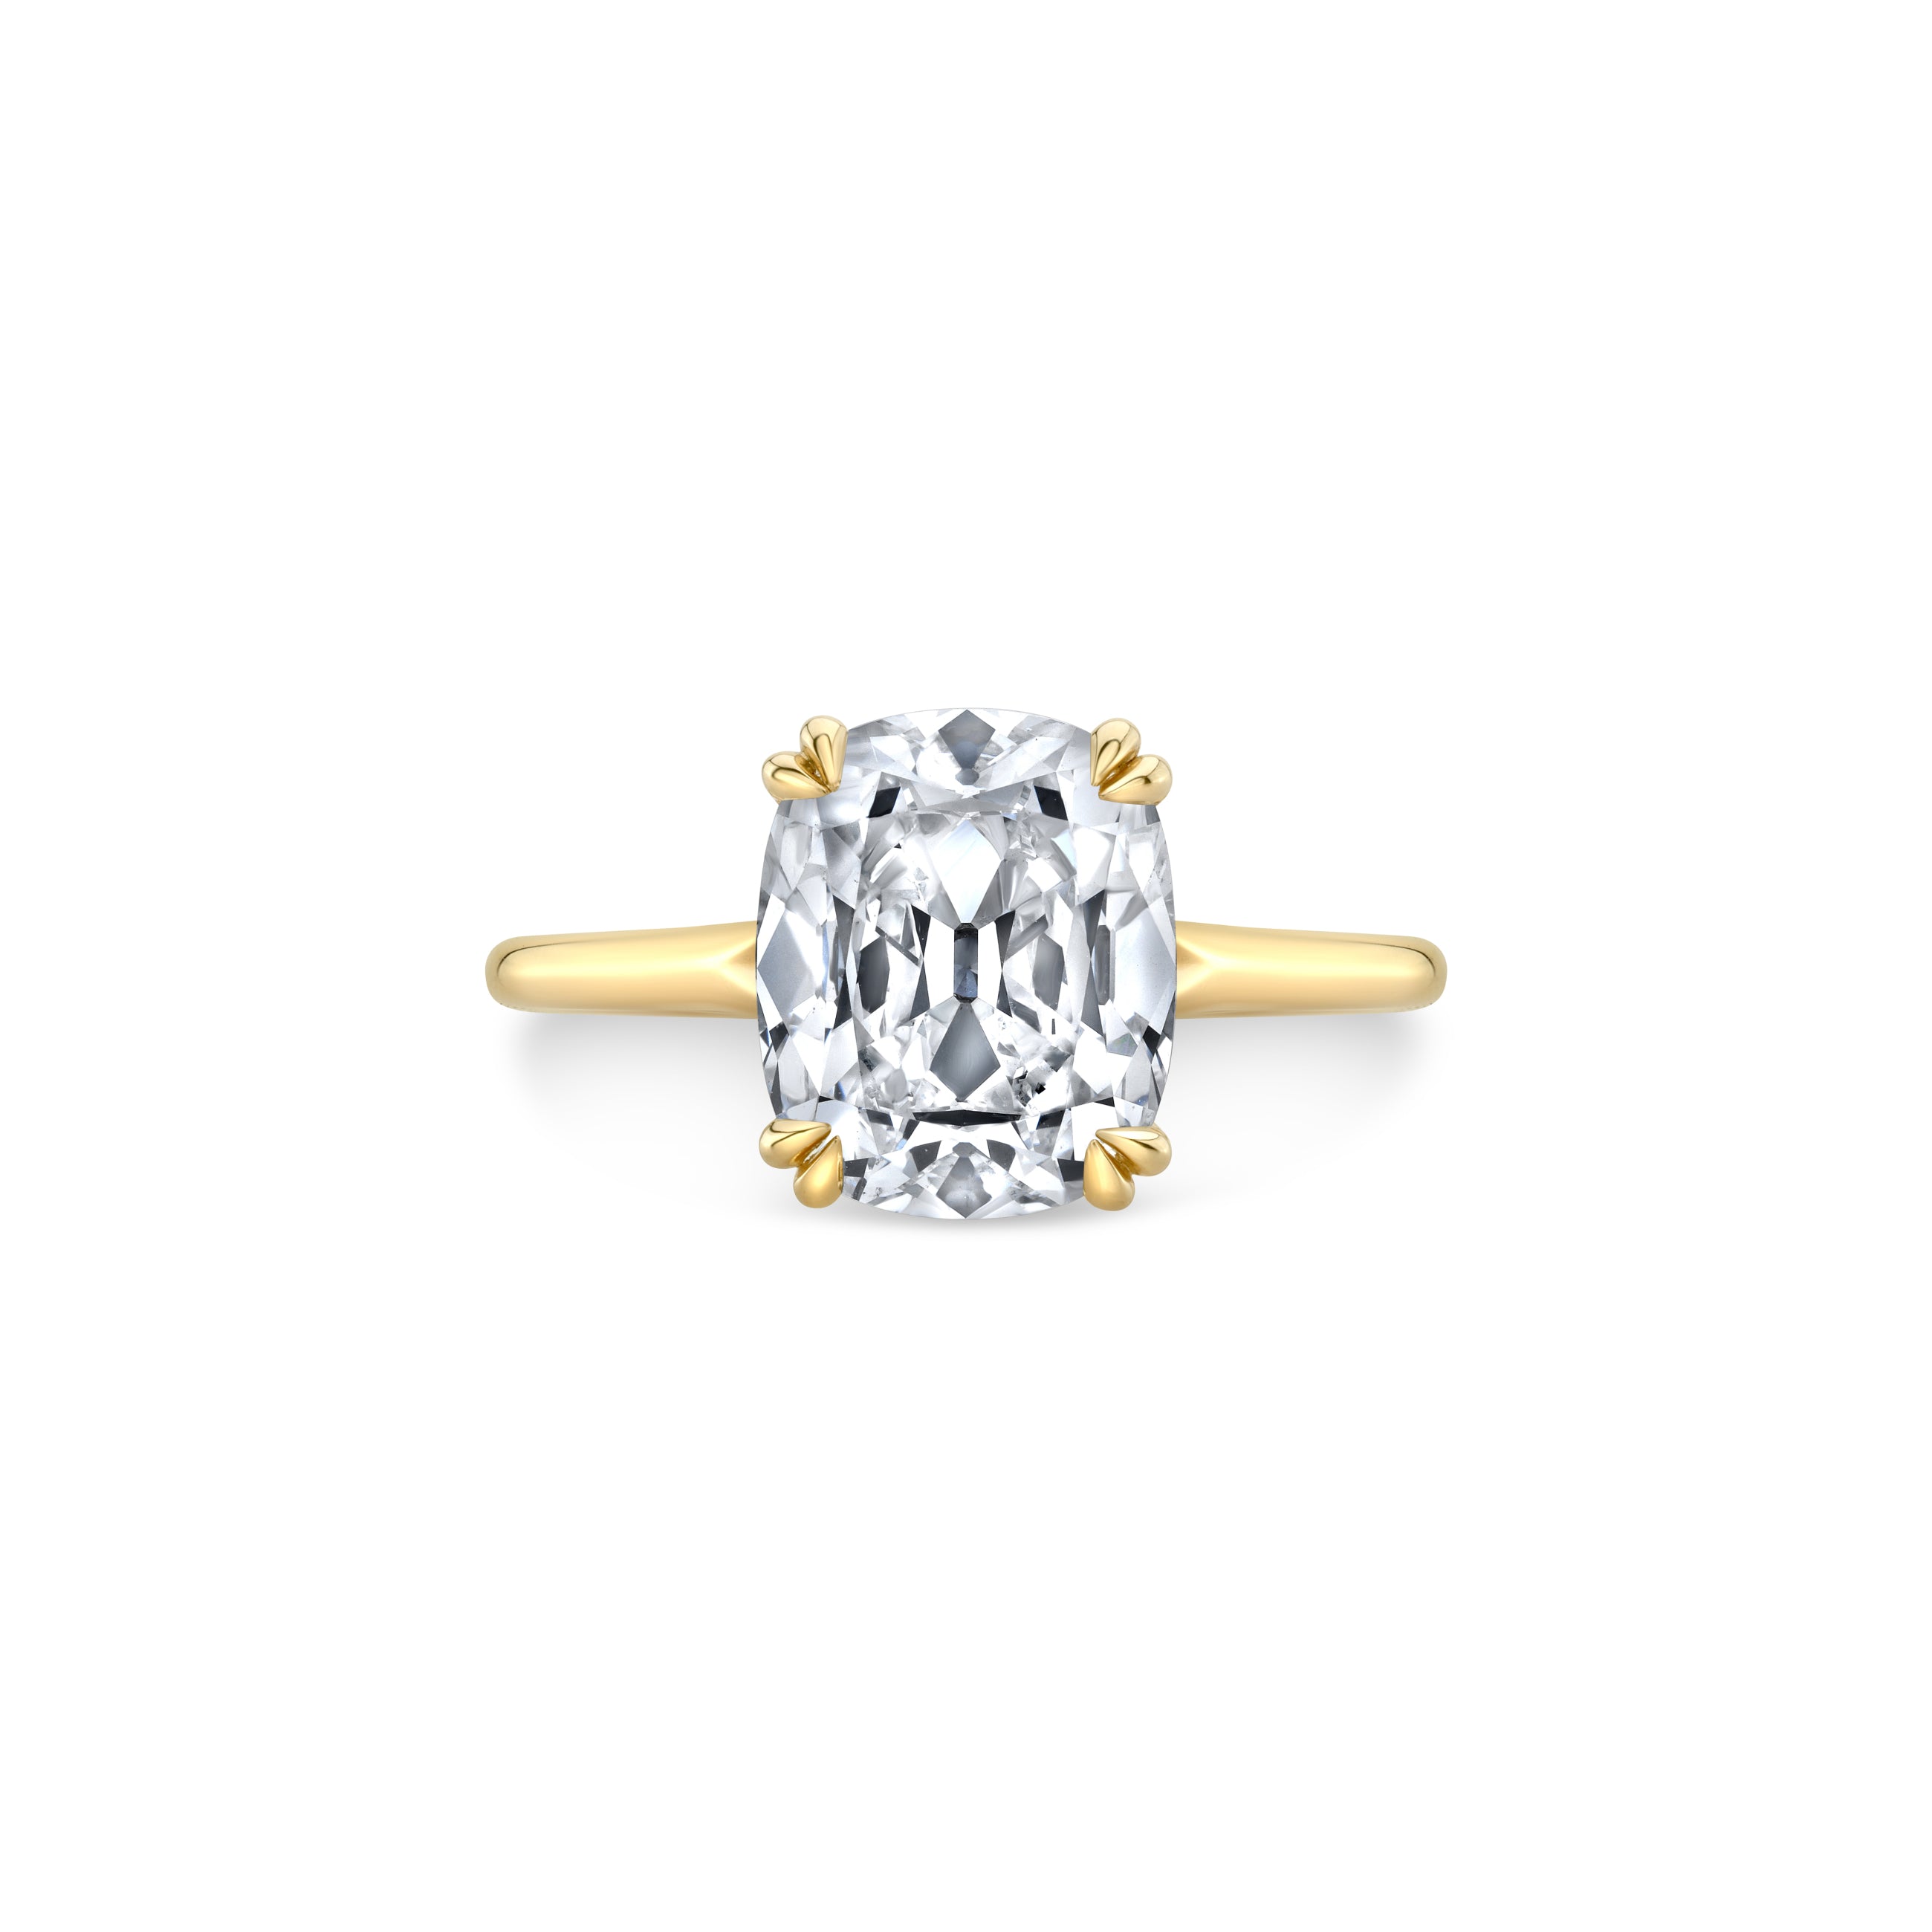 3.02 Carat Antique Cushion Lab Diamond Solitaire Engagement Ring | White Gold | by Lauren B Jewelry